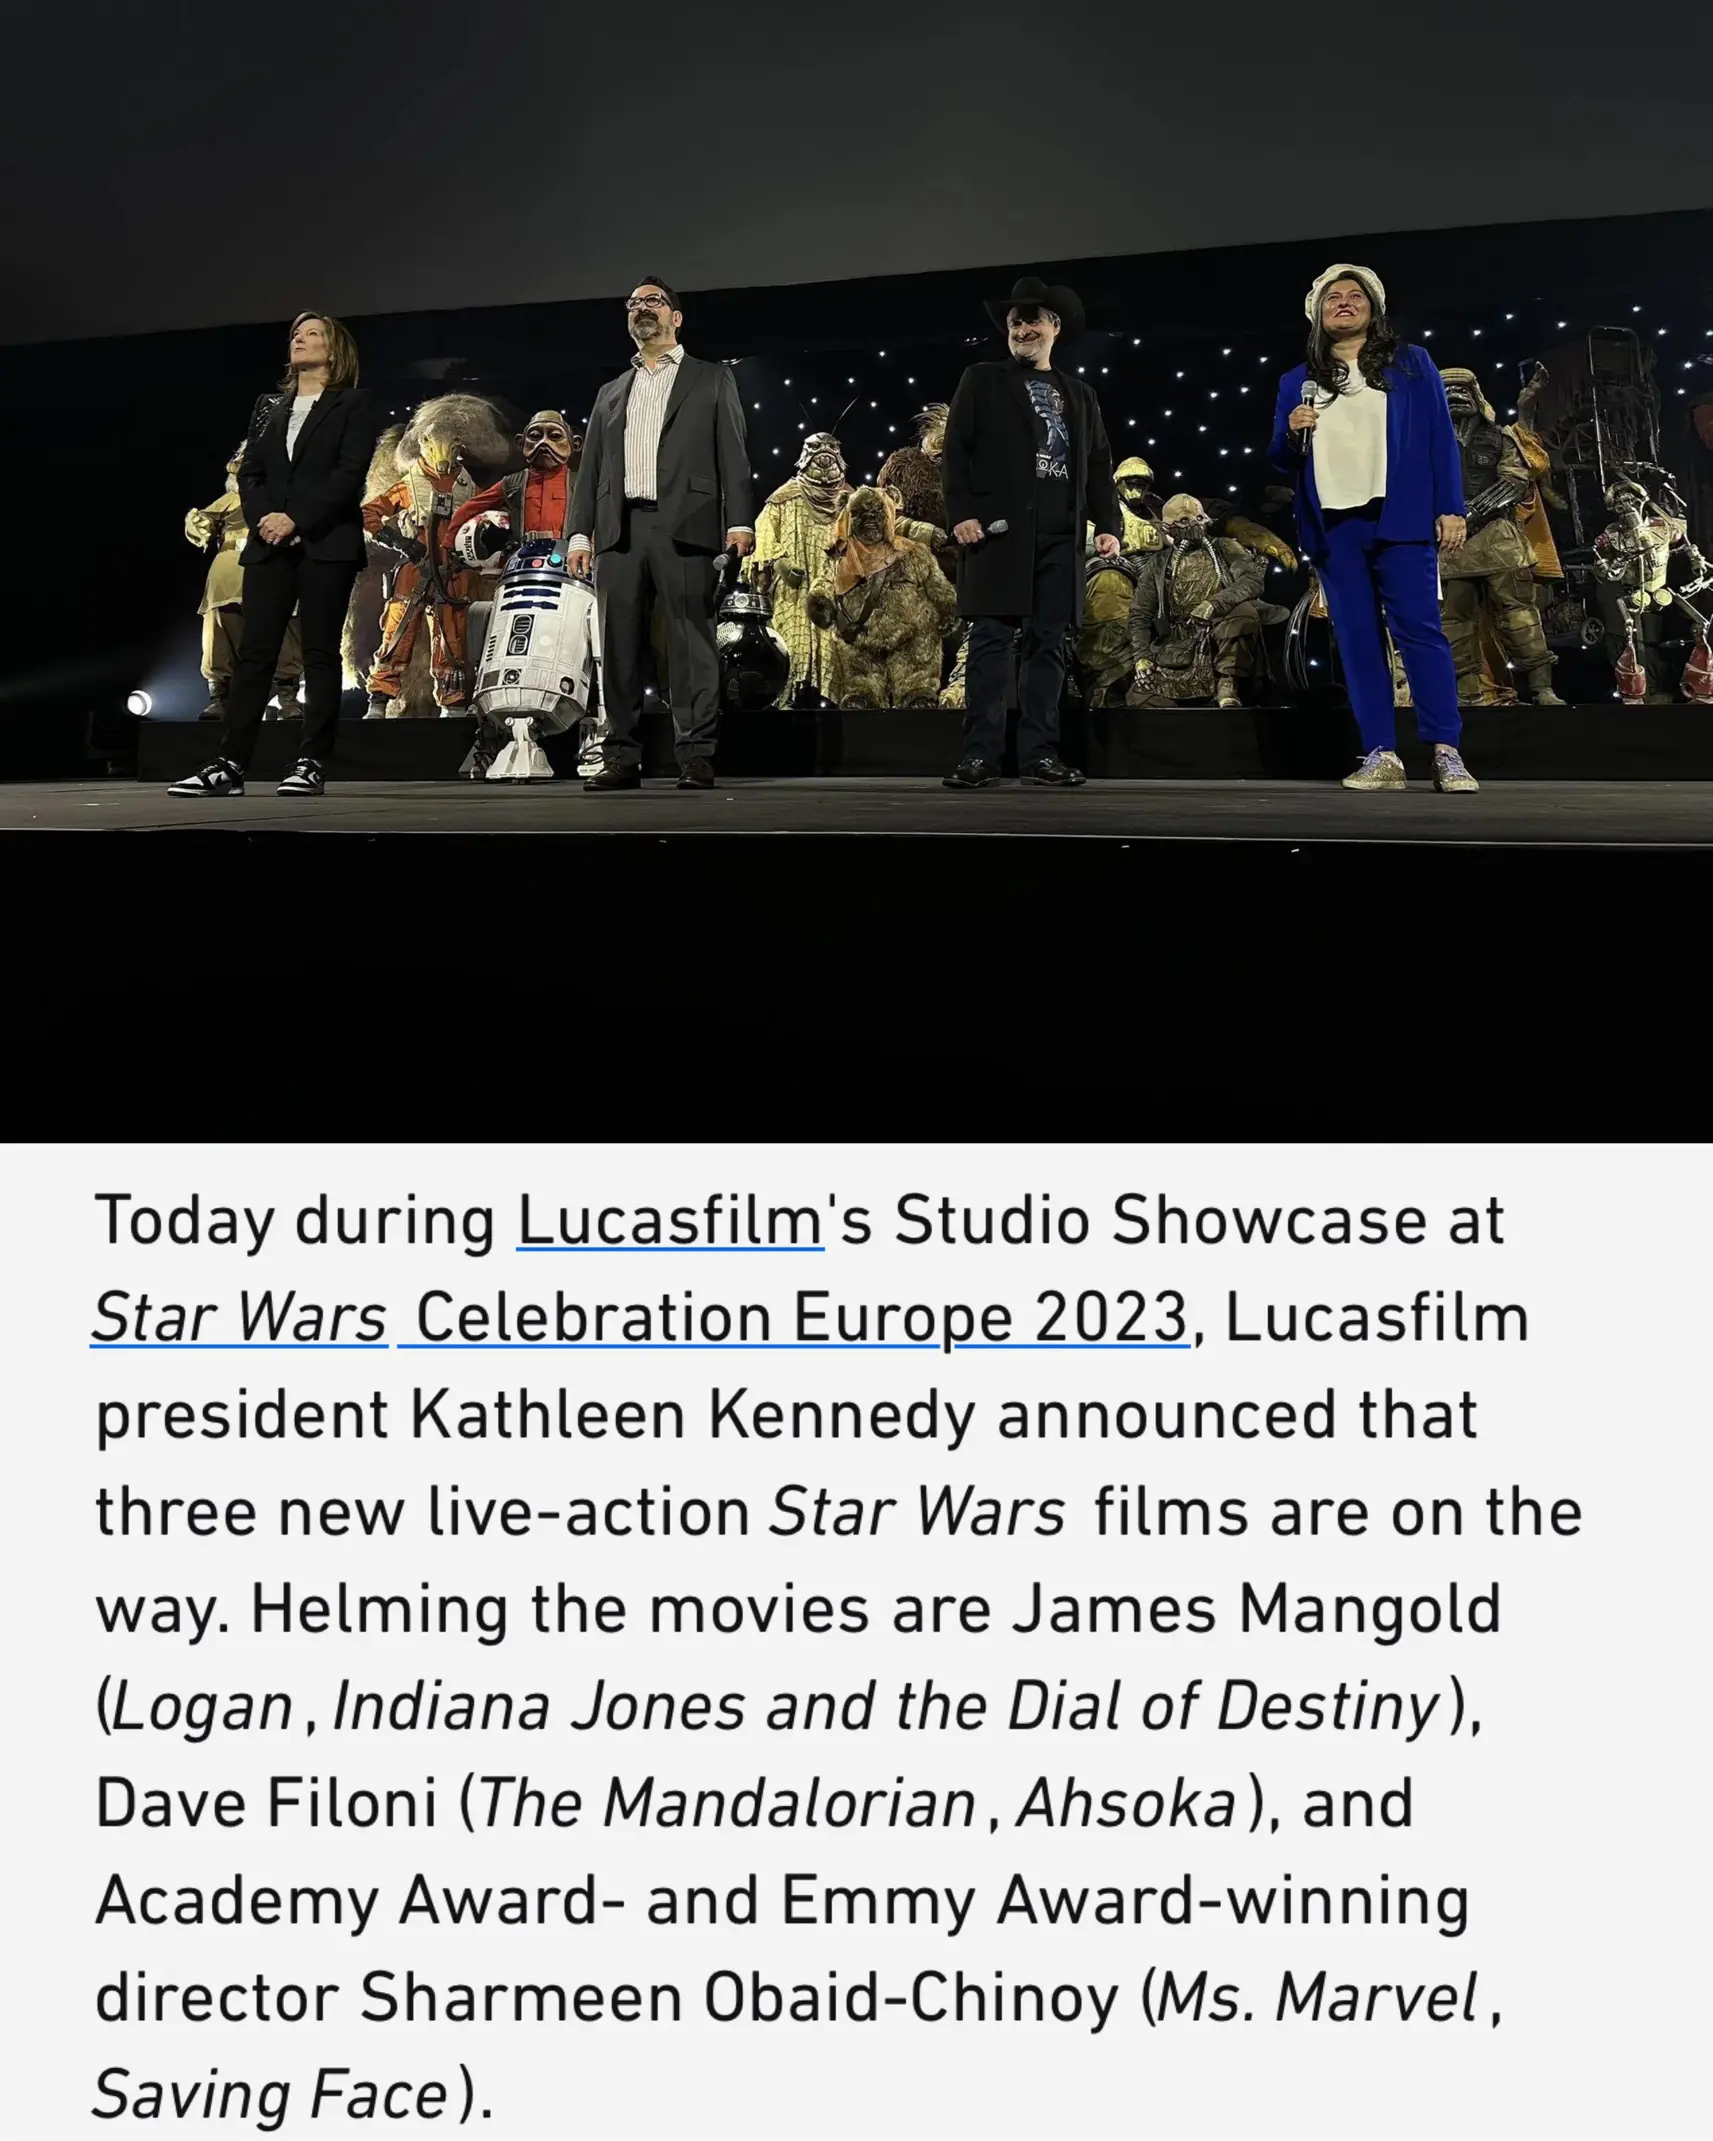 SWCE 2023: Three New Star Wars Movies Announced